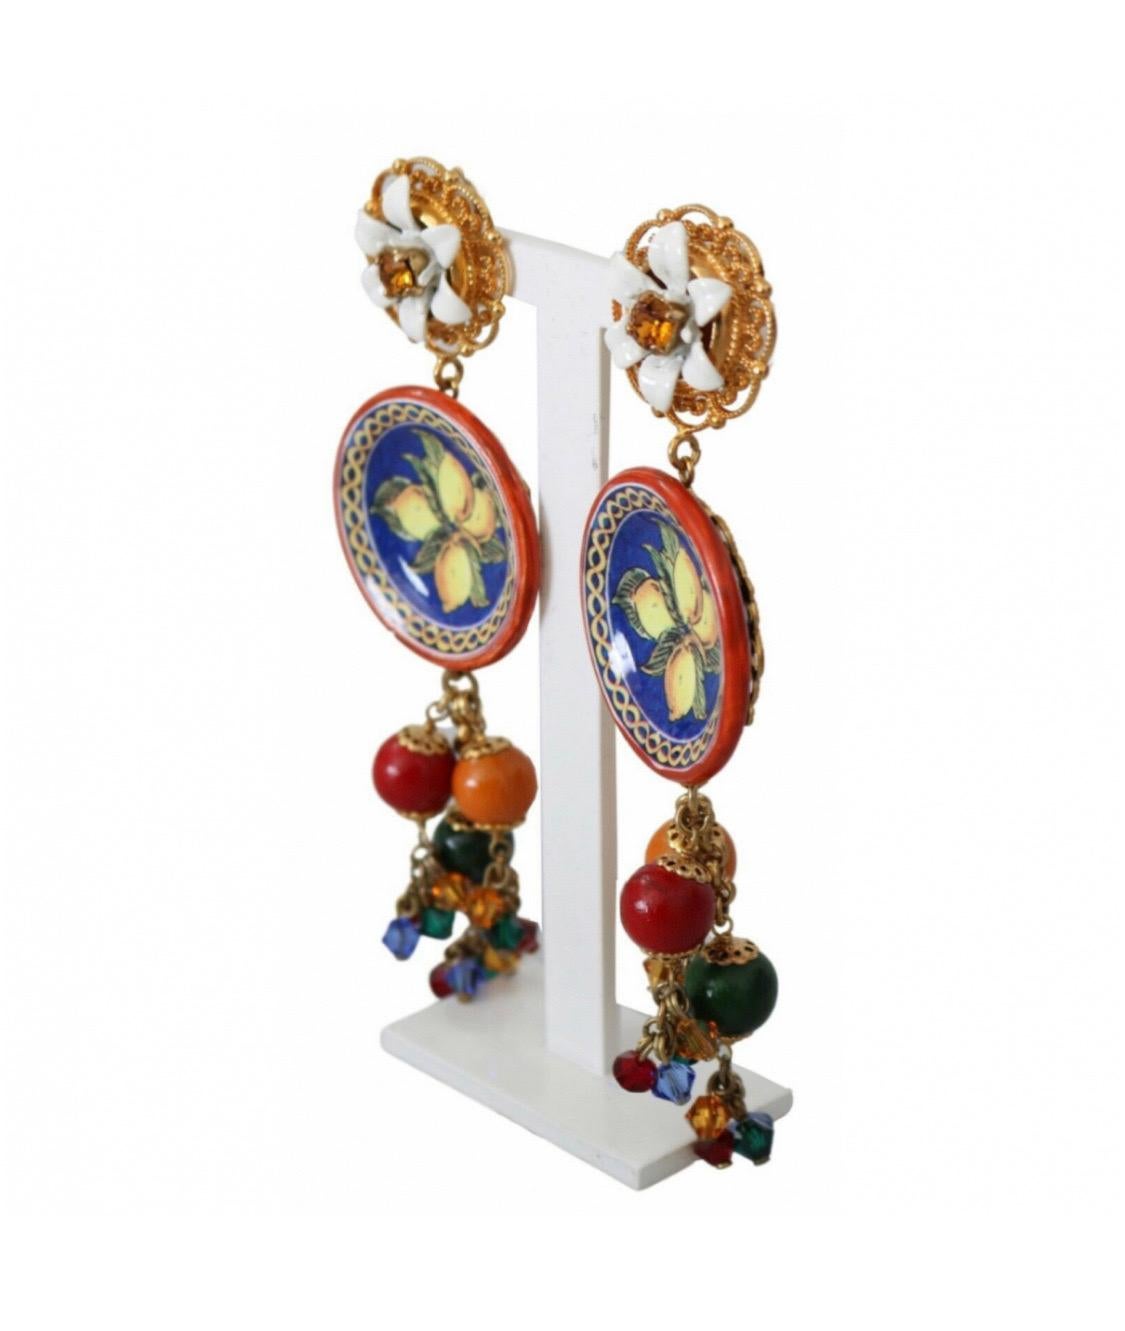 Gorgeous brand new with tags,
100% Authentic Dolce &

Gabbana Carretto lemon drop earrings.
Polished yellow golden brass hardware
with resin forms flower and lemon
motifs.

Model: Clip-on, drop

Motive: Lemon

Material: Brass, glass, resin

Color: